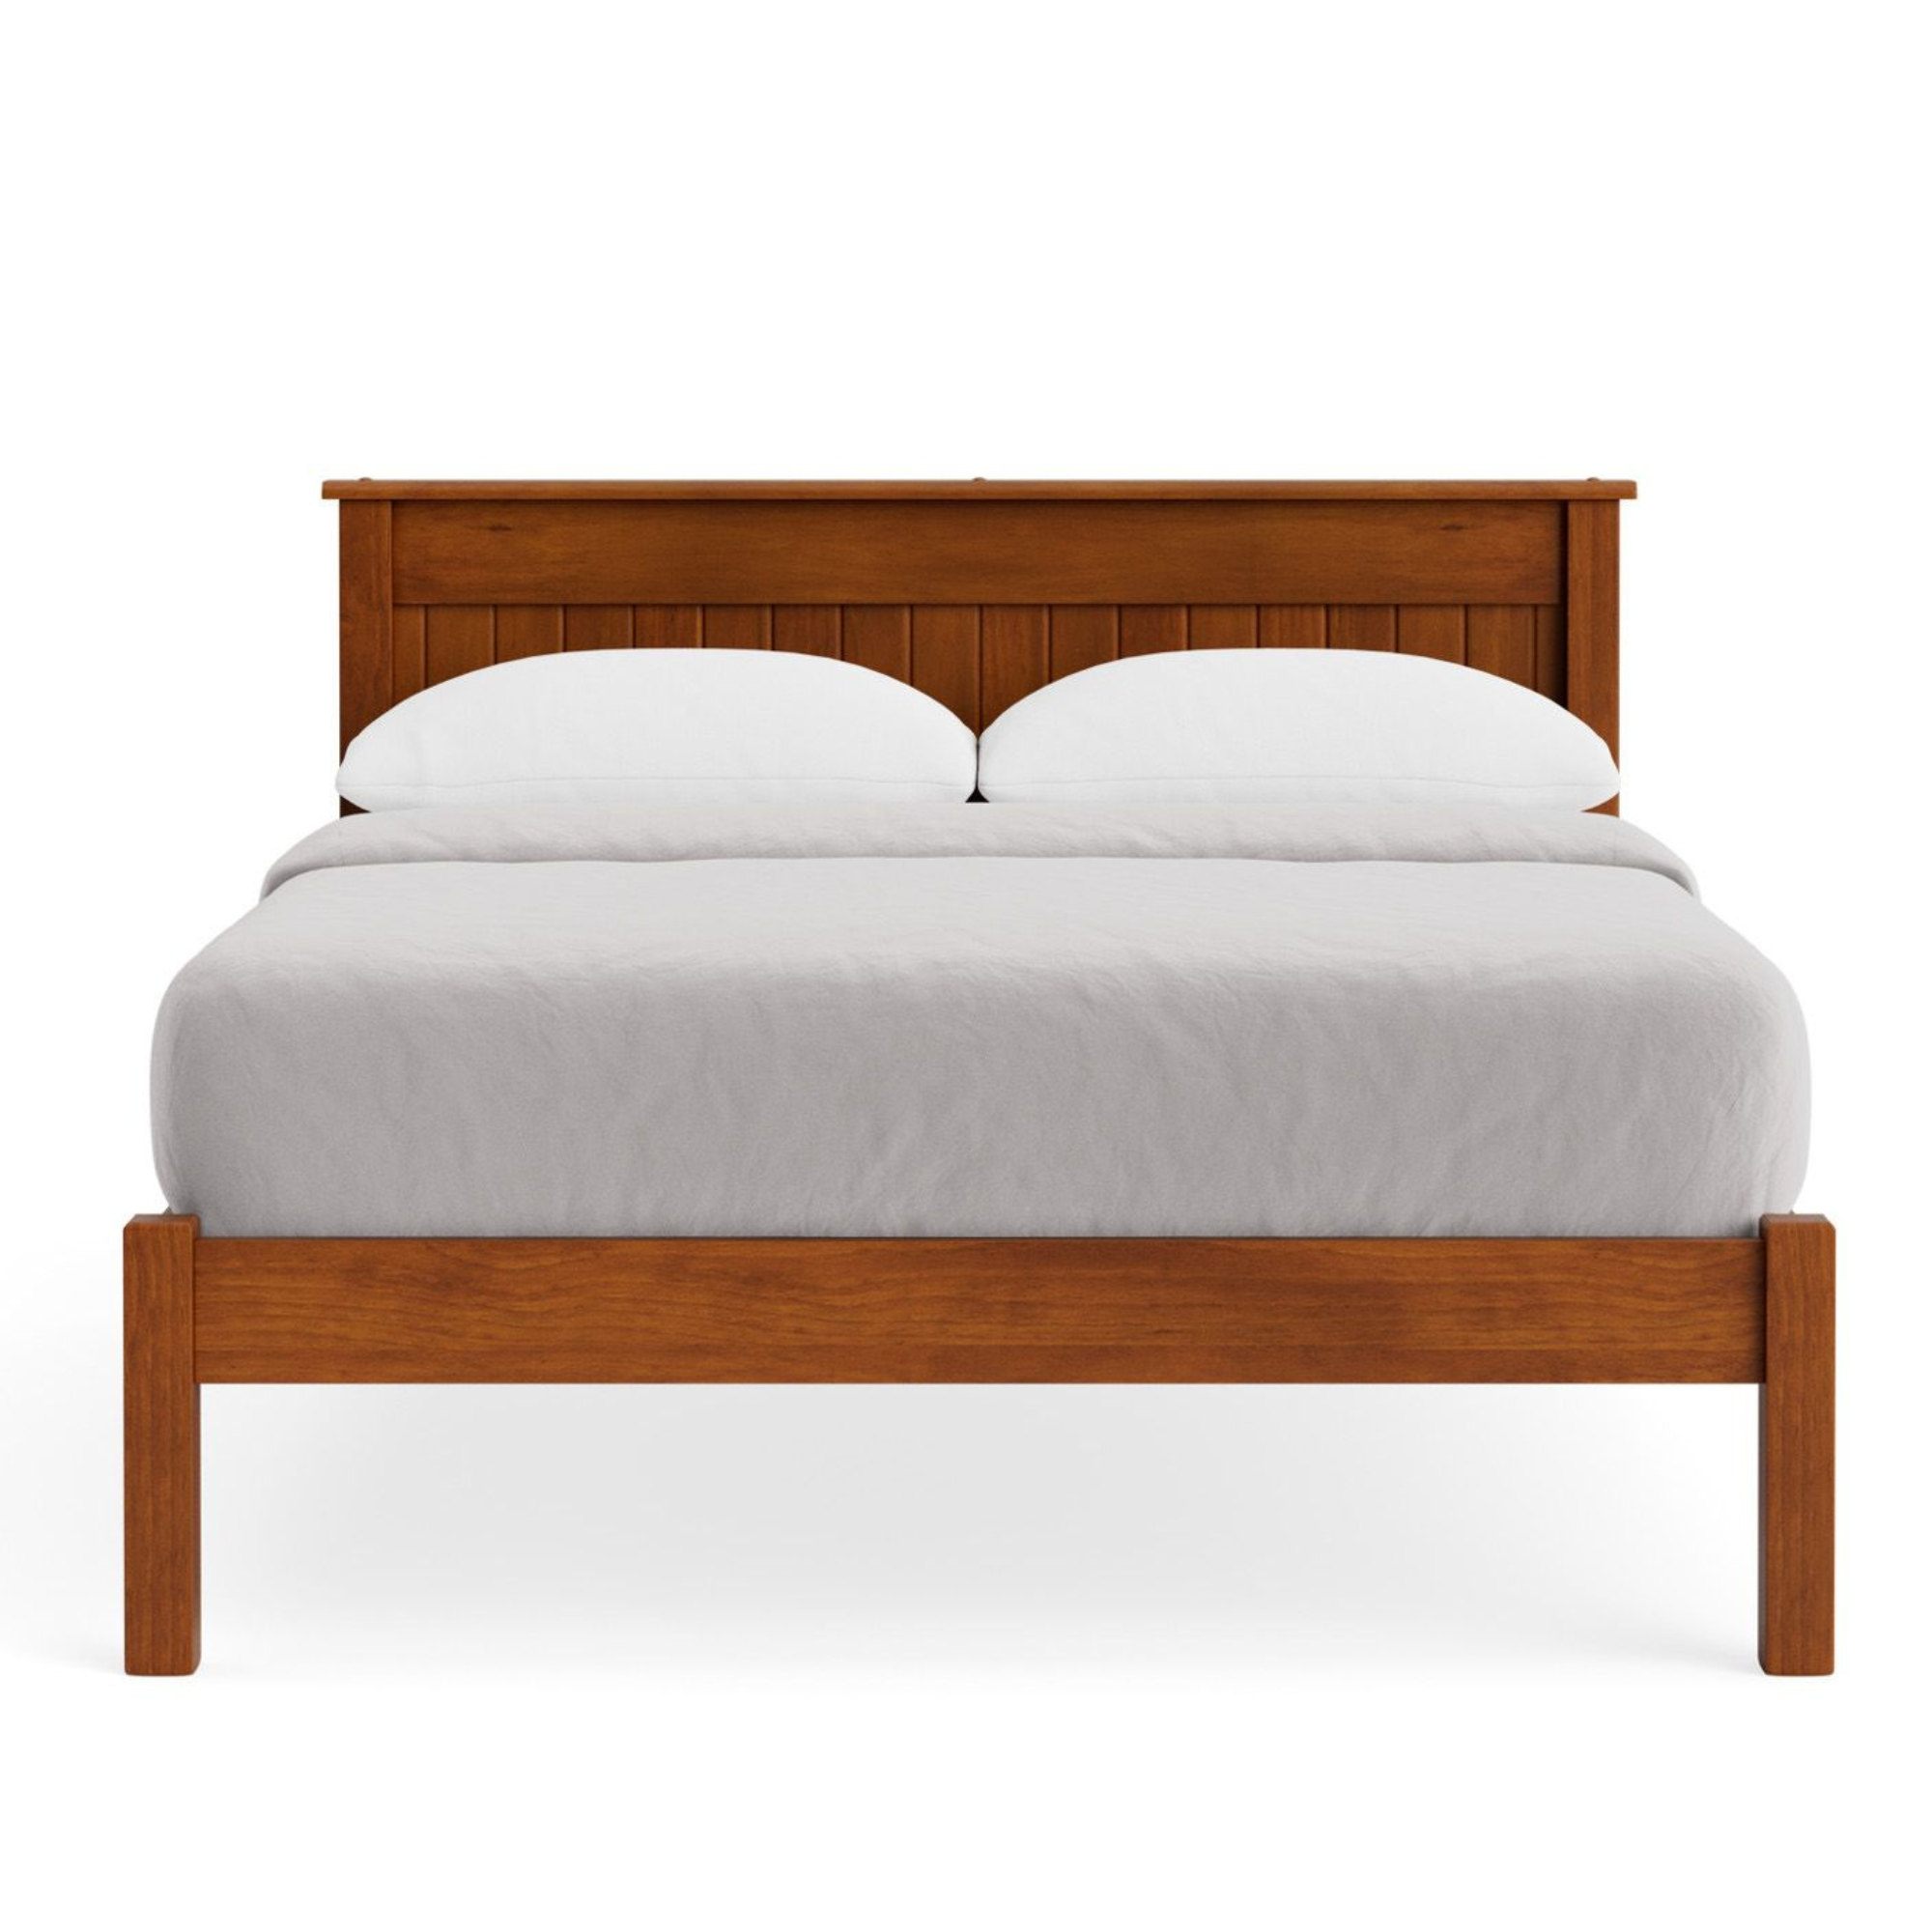 ANDORRA SLAT BED | LOW FOOT END | ALL SIZES | NZ MADE BEDROOM FURNITURE